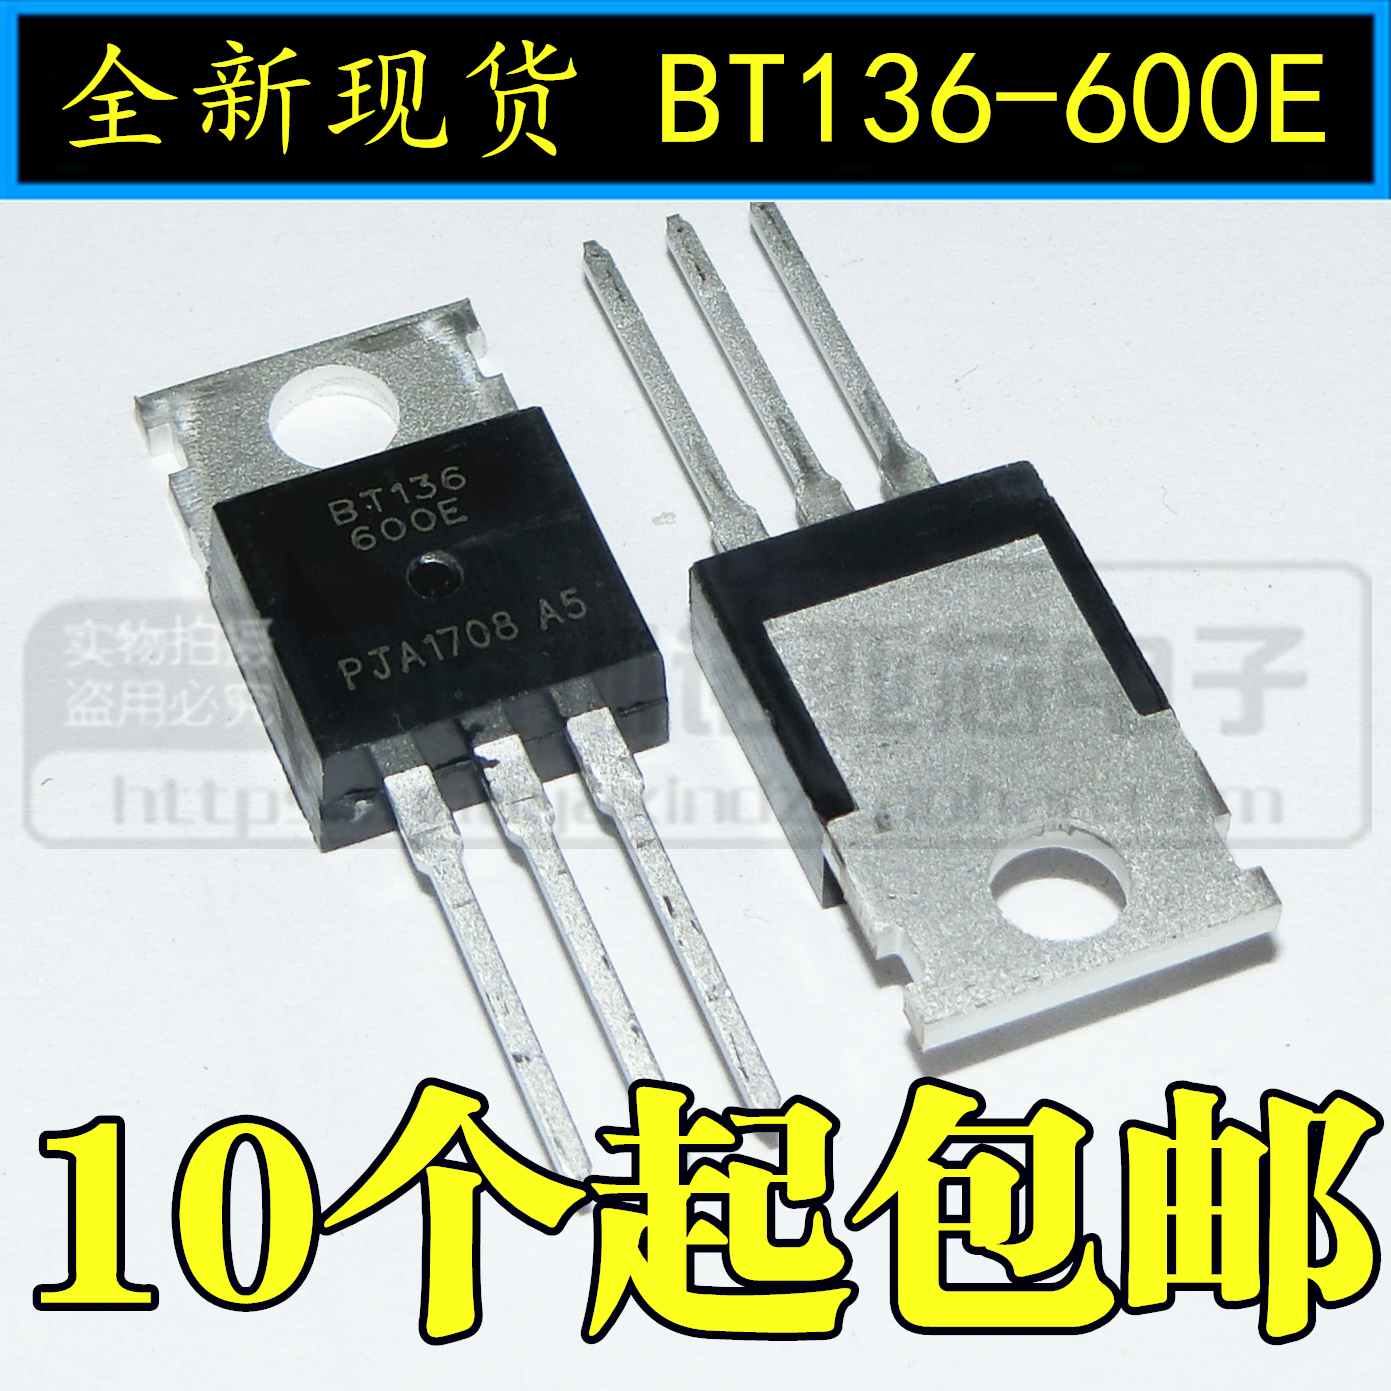 Special BT136 new bidirectional semiconductor control rectifier BT136-600E TO-220 good quality